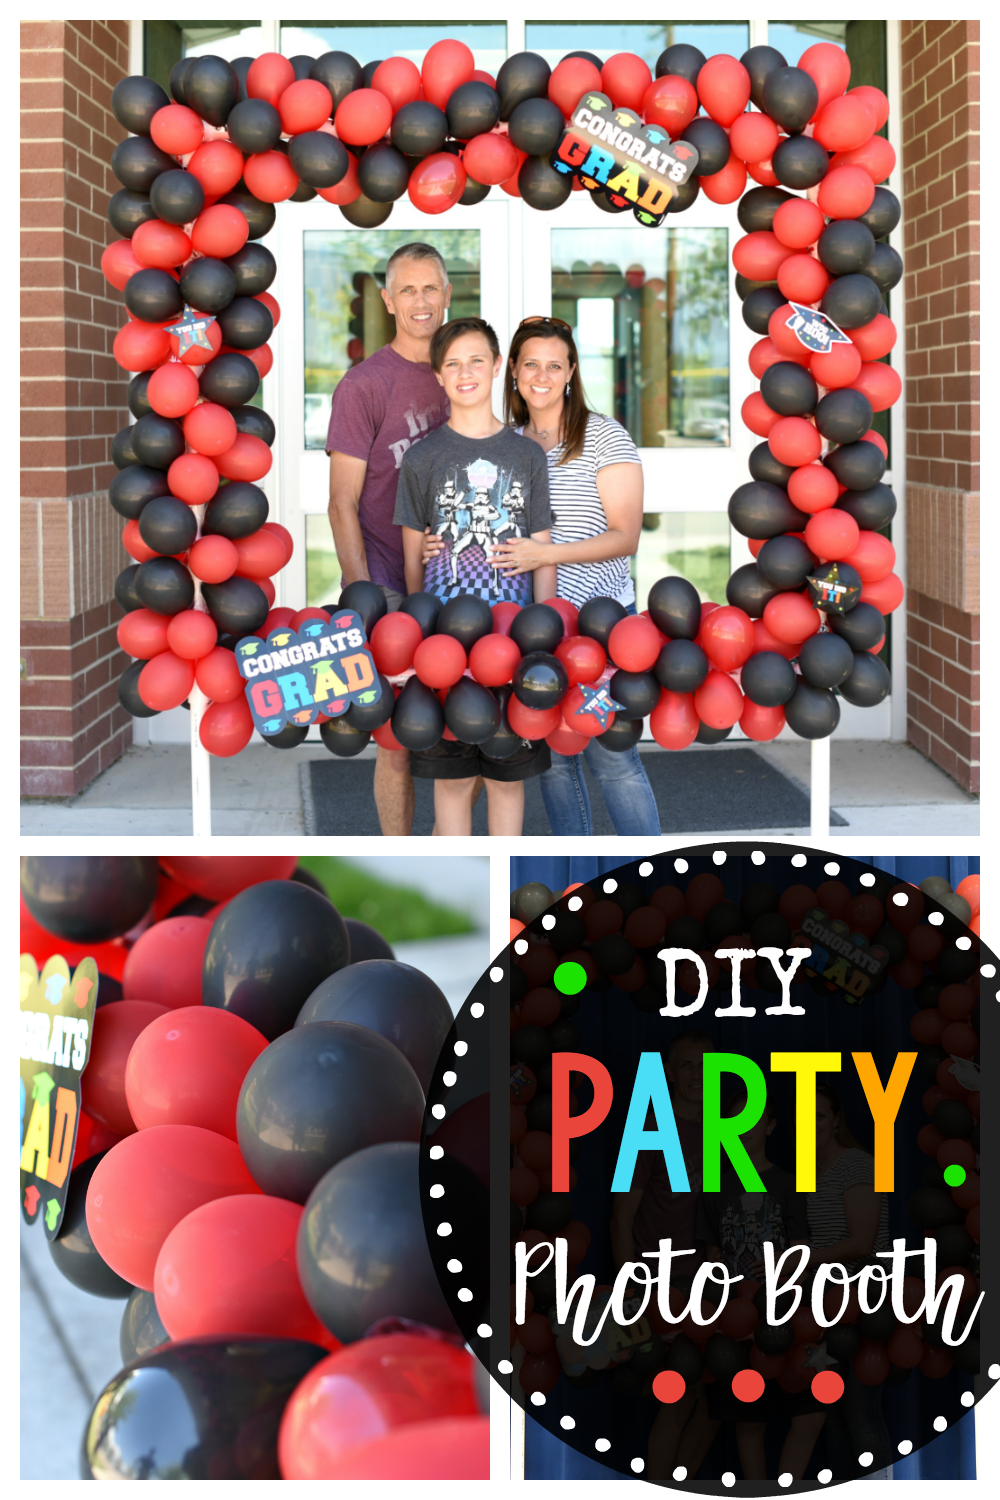 DIY Party Photo Booth-This balloon photo booth is perfect for any party or special occasion! Graduation, birthdays, weddings or any fun event. Create this photo booth with these step by step instructions and cover it with balloons for the best photo booth ever! #party #partydecor #partydecorations #partyideas #graduation #photobooth